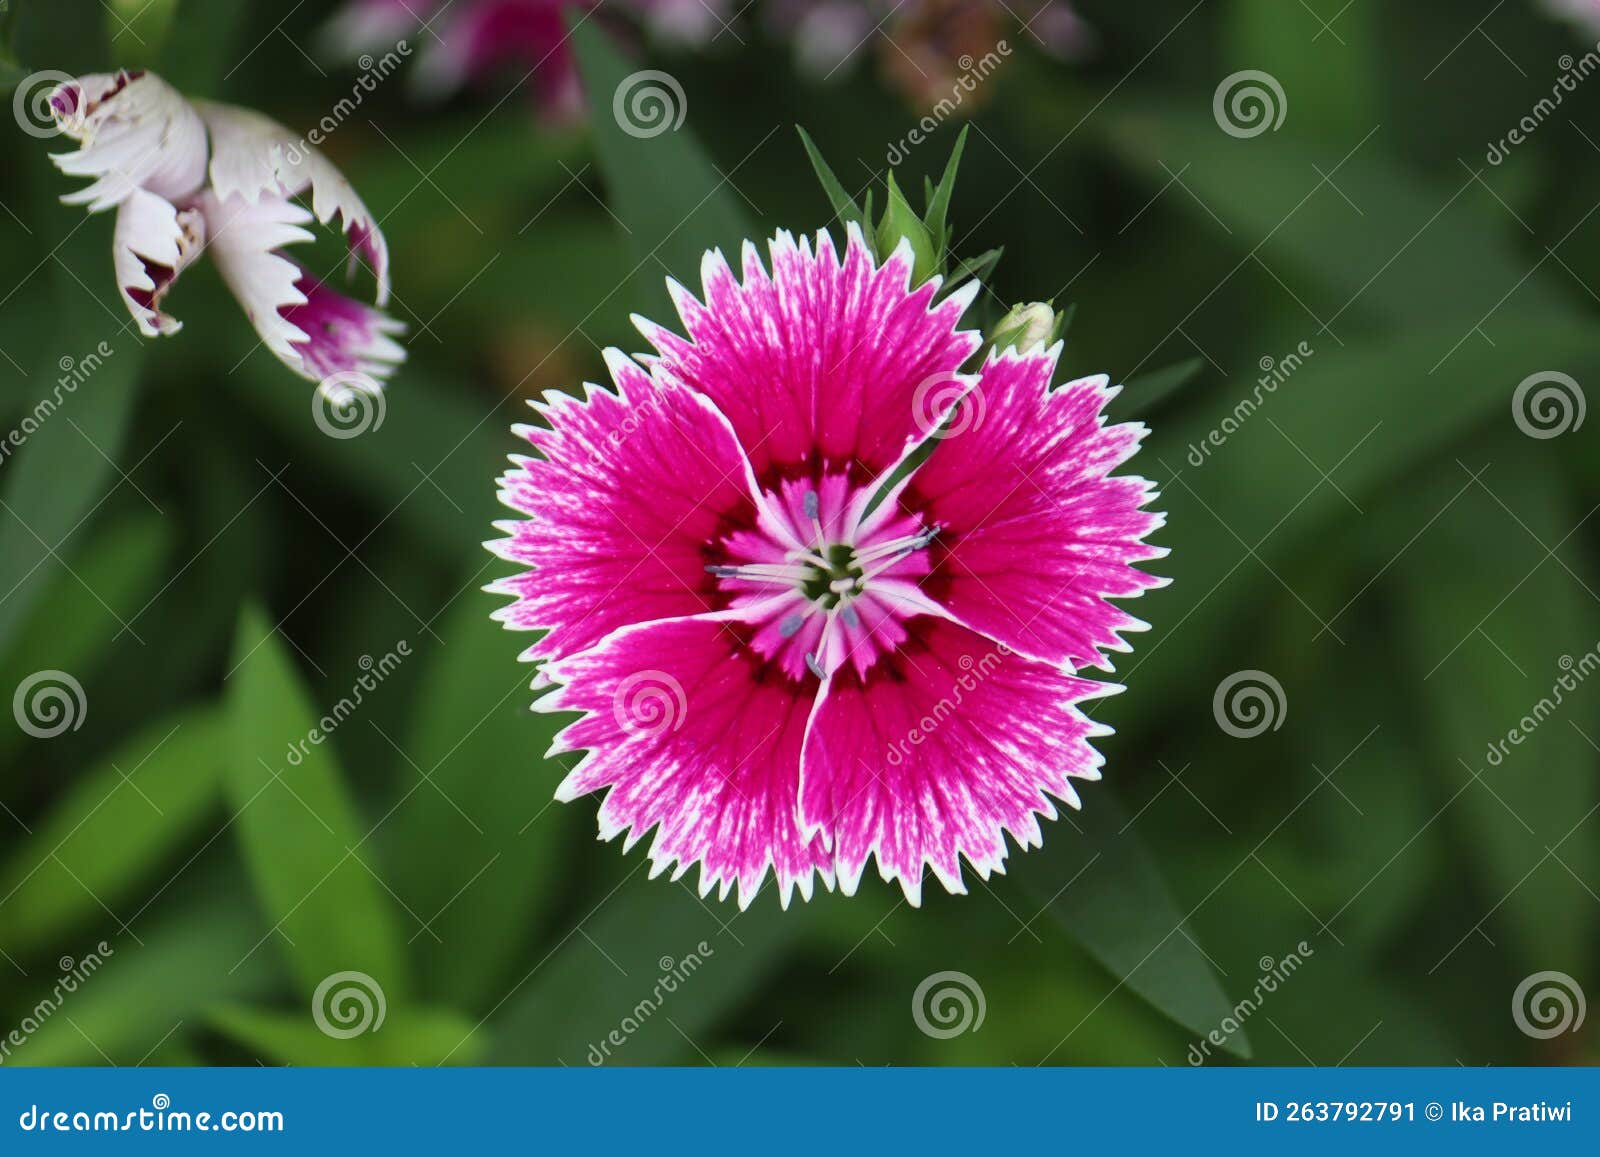 white-pink gradations of clavel plant flowers (dianthus caryophyllus)